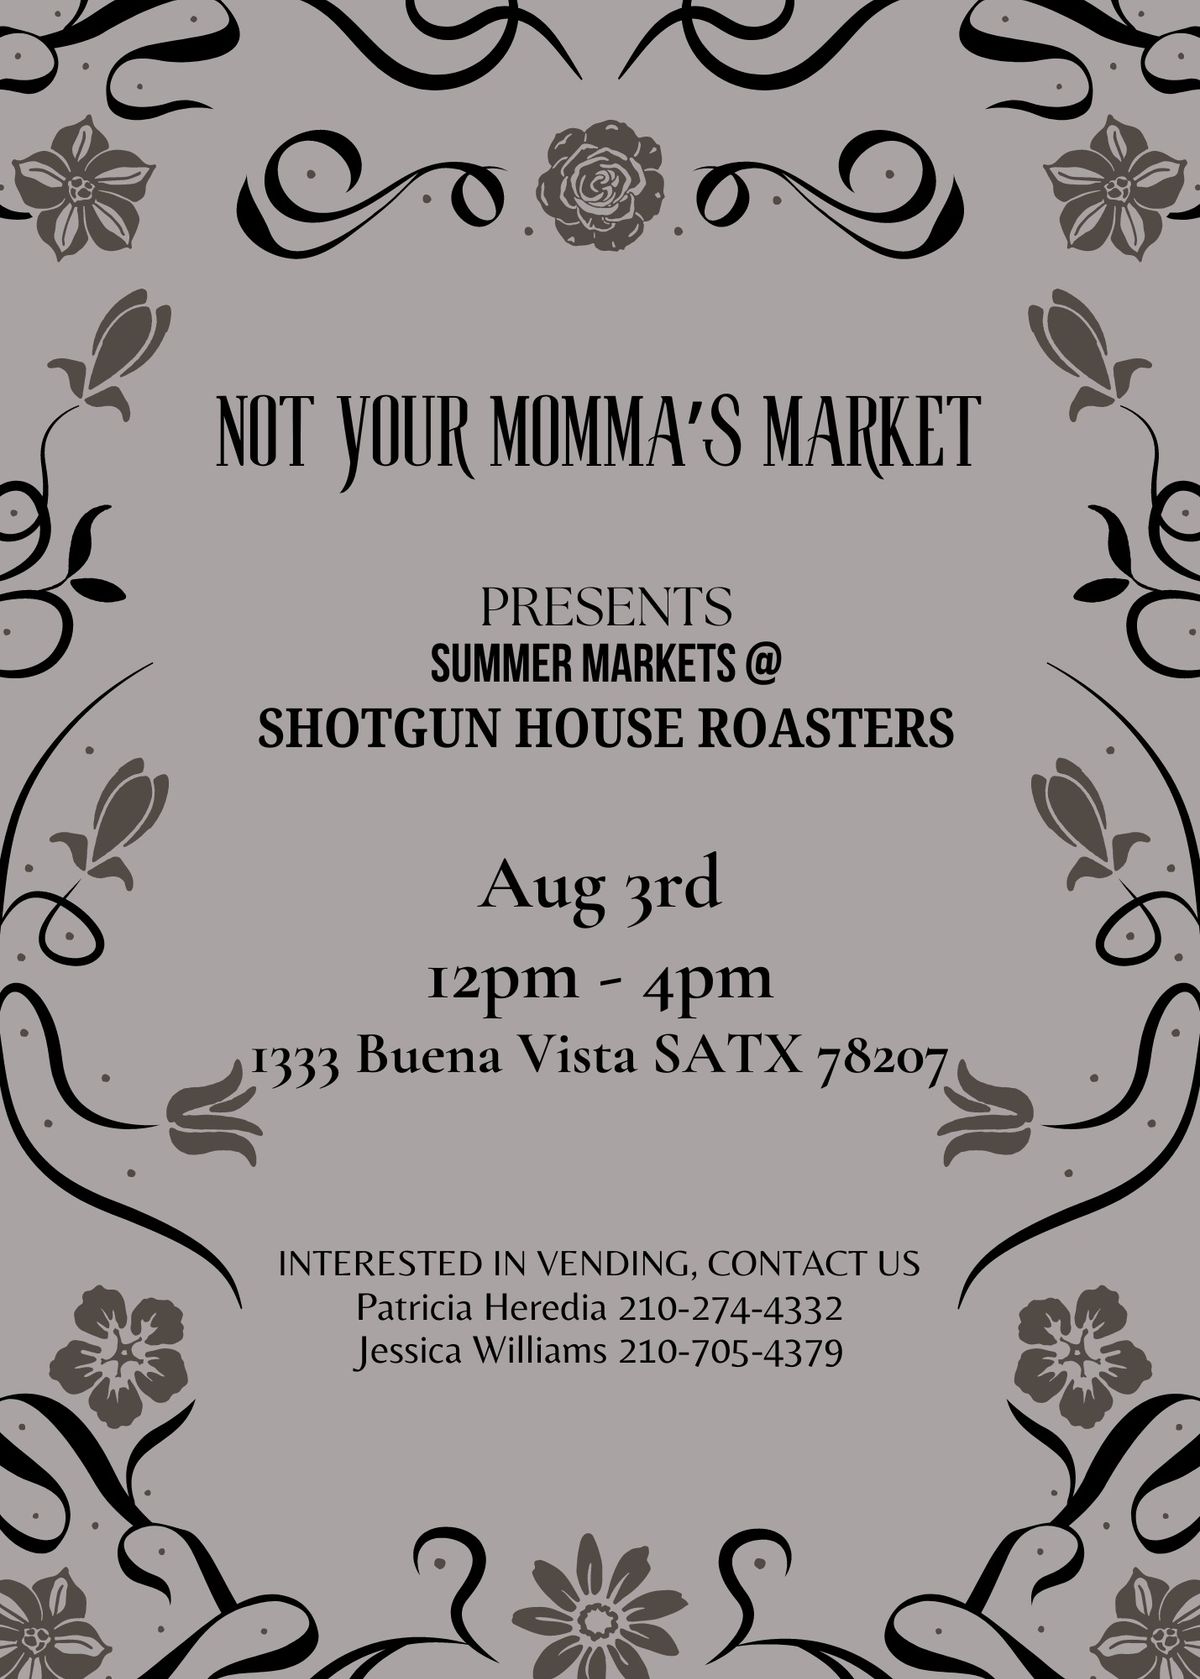 Summer Market with Not Your Mommas Market and Shotgun House Roasters